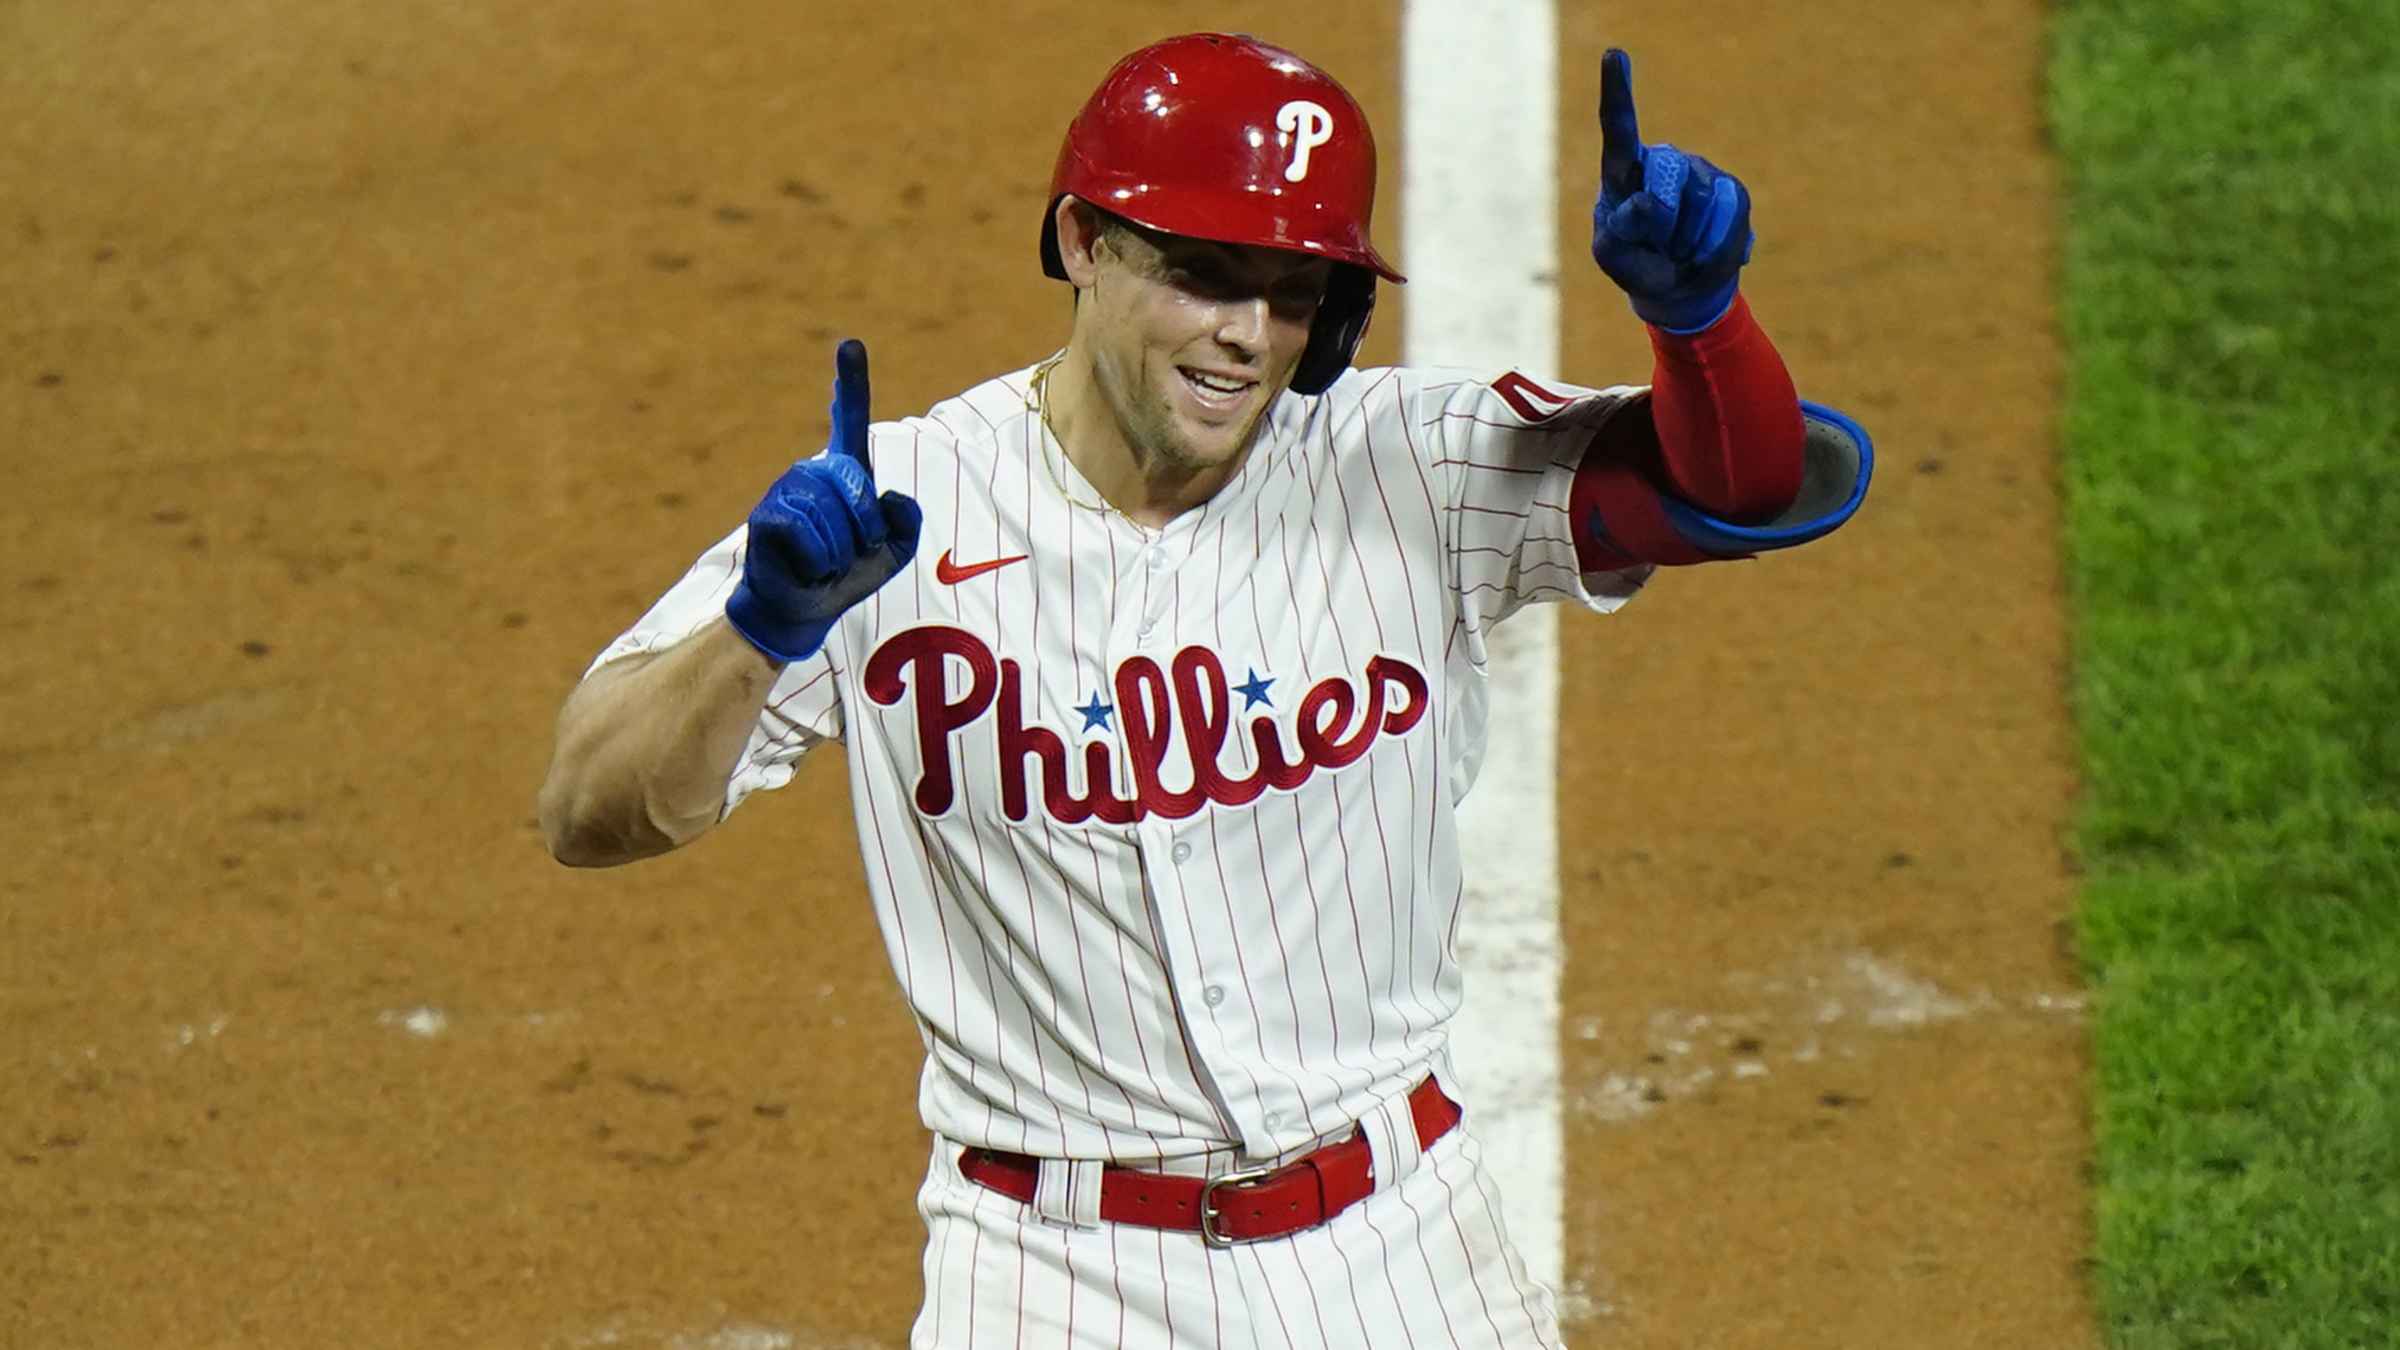 Can Scott Kingery recover from his difficult 2020 season? - The Good Phight